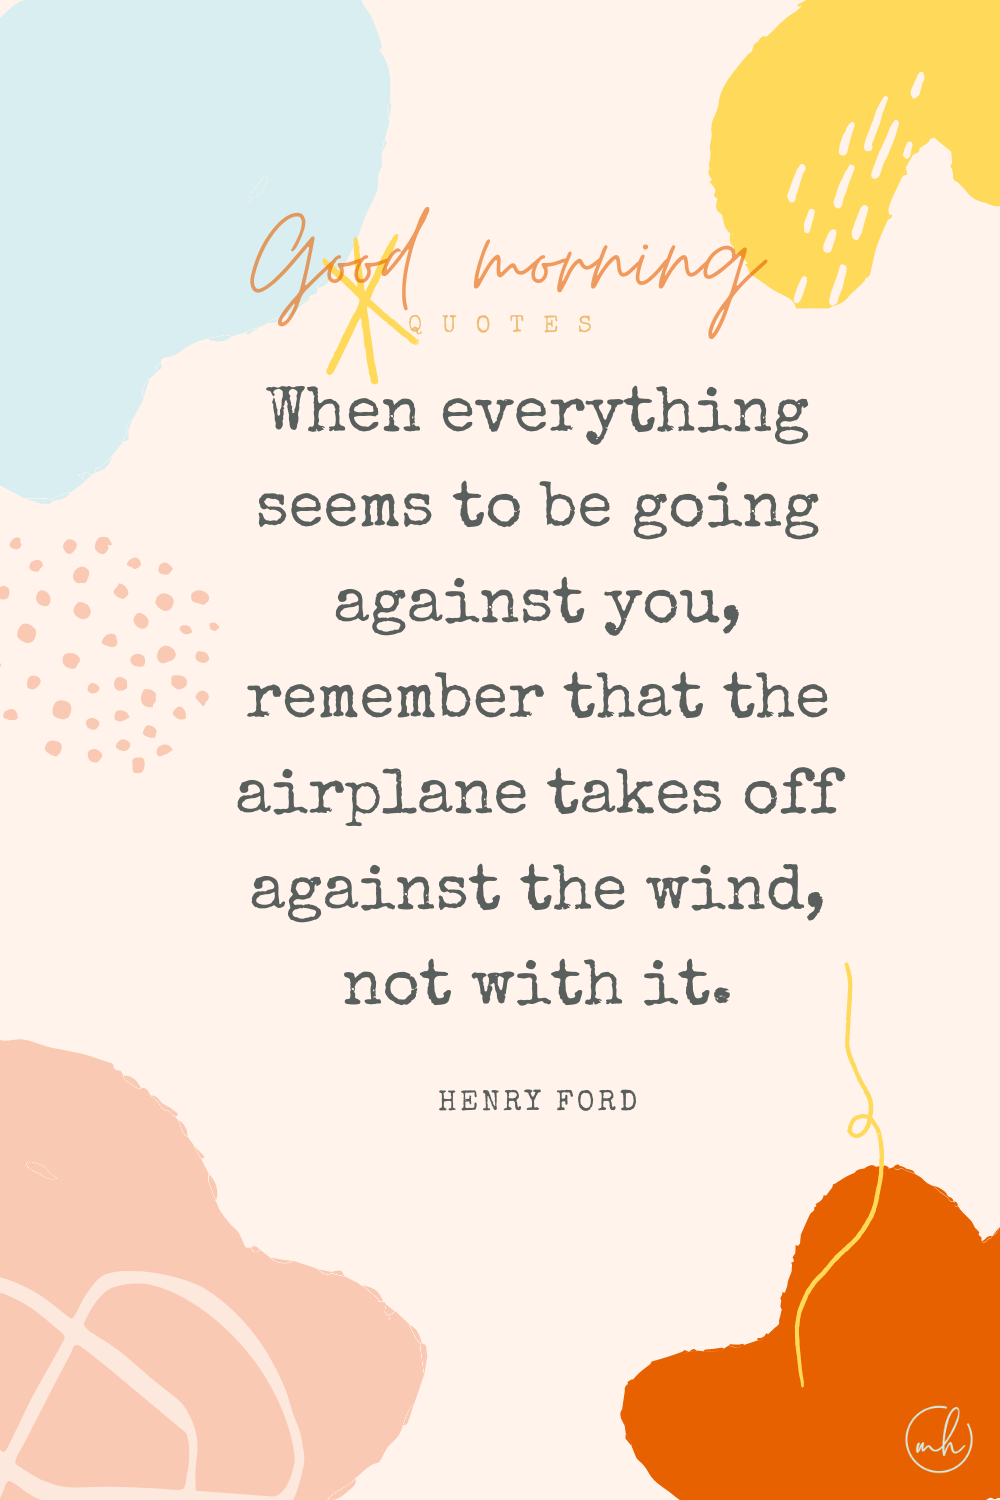 "When everything seems to be going against you, remember that the airplane takes off against the wind, not with it."– Henry Ford